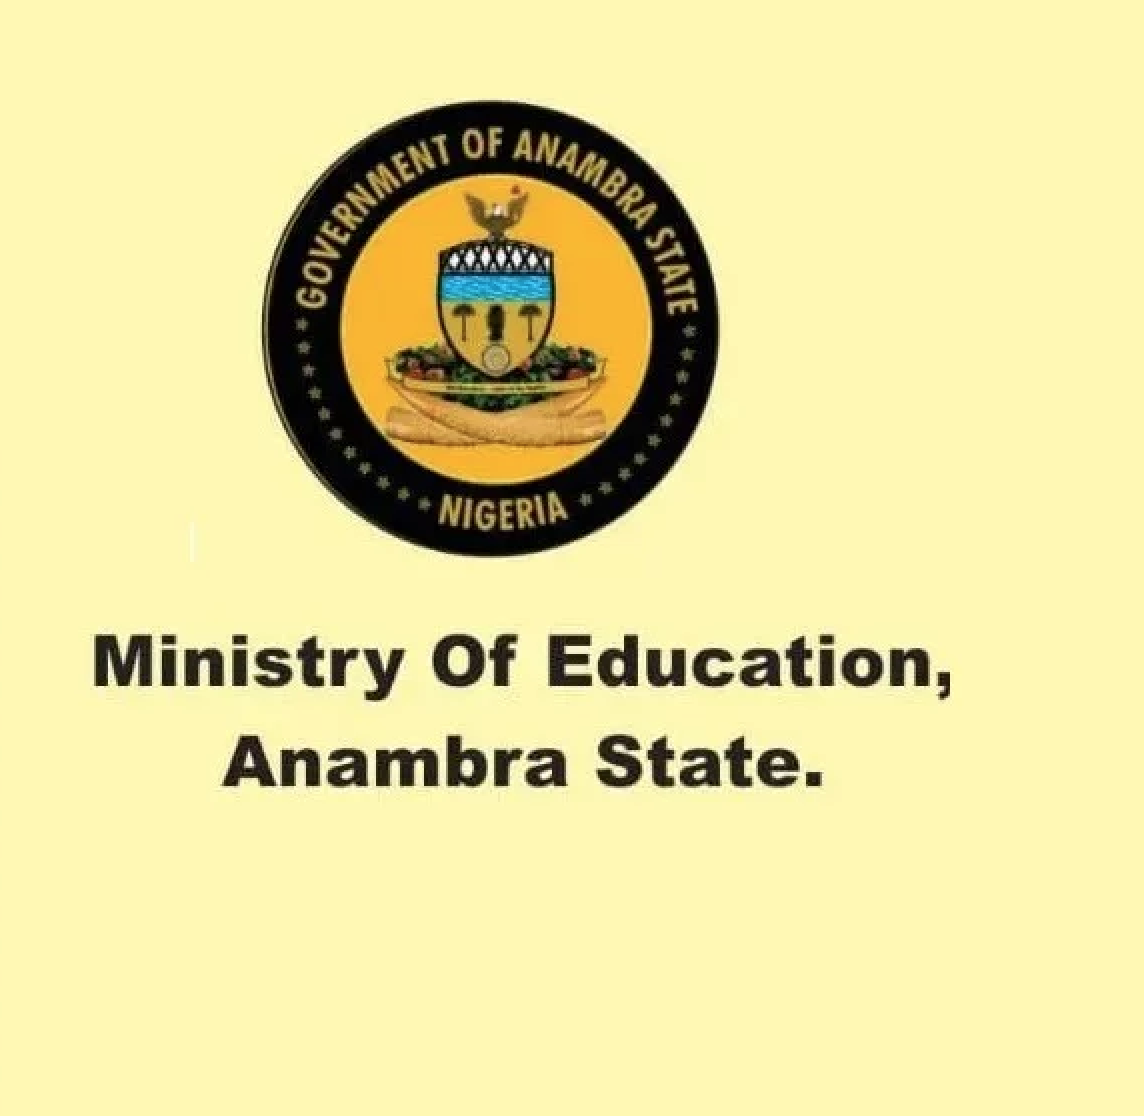 [GIST] How Anambra State Education Ministry Violated Rules, Freed 68-year-old, 140 Others Caught In Recruitment Examination Fraud